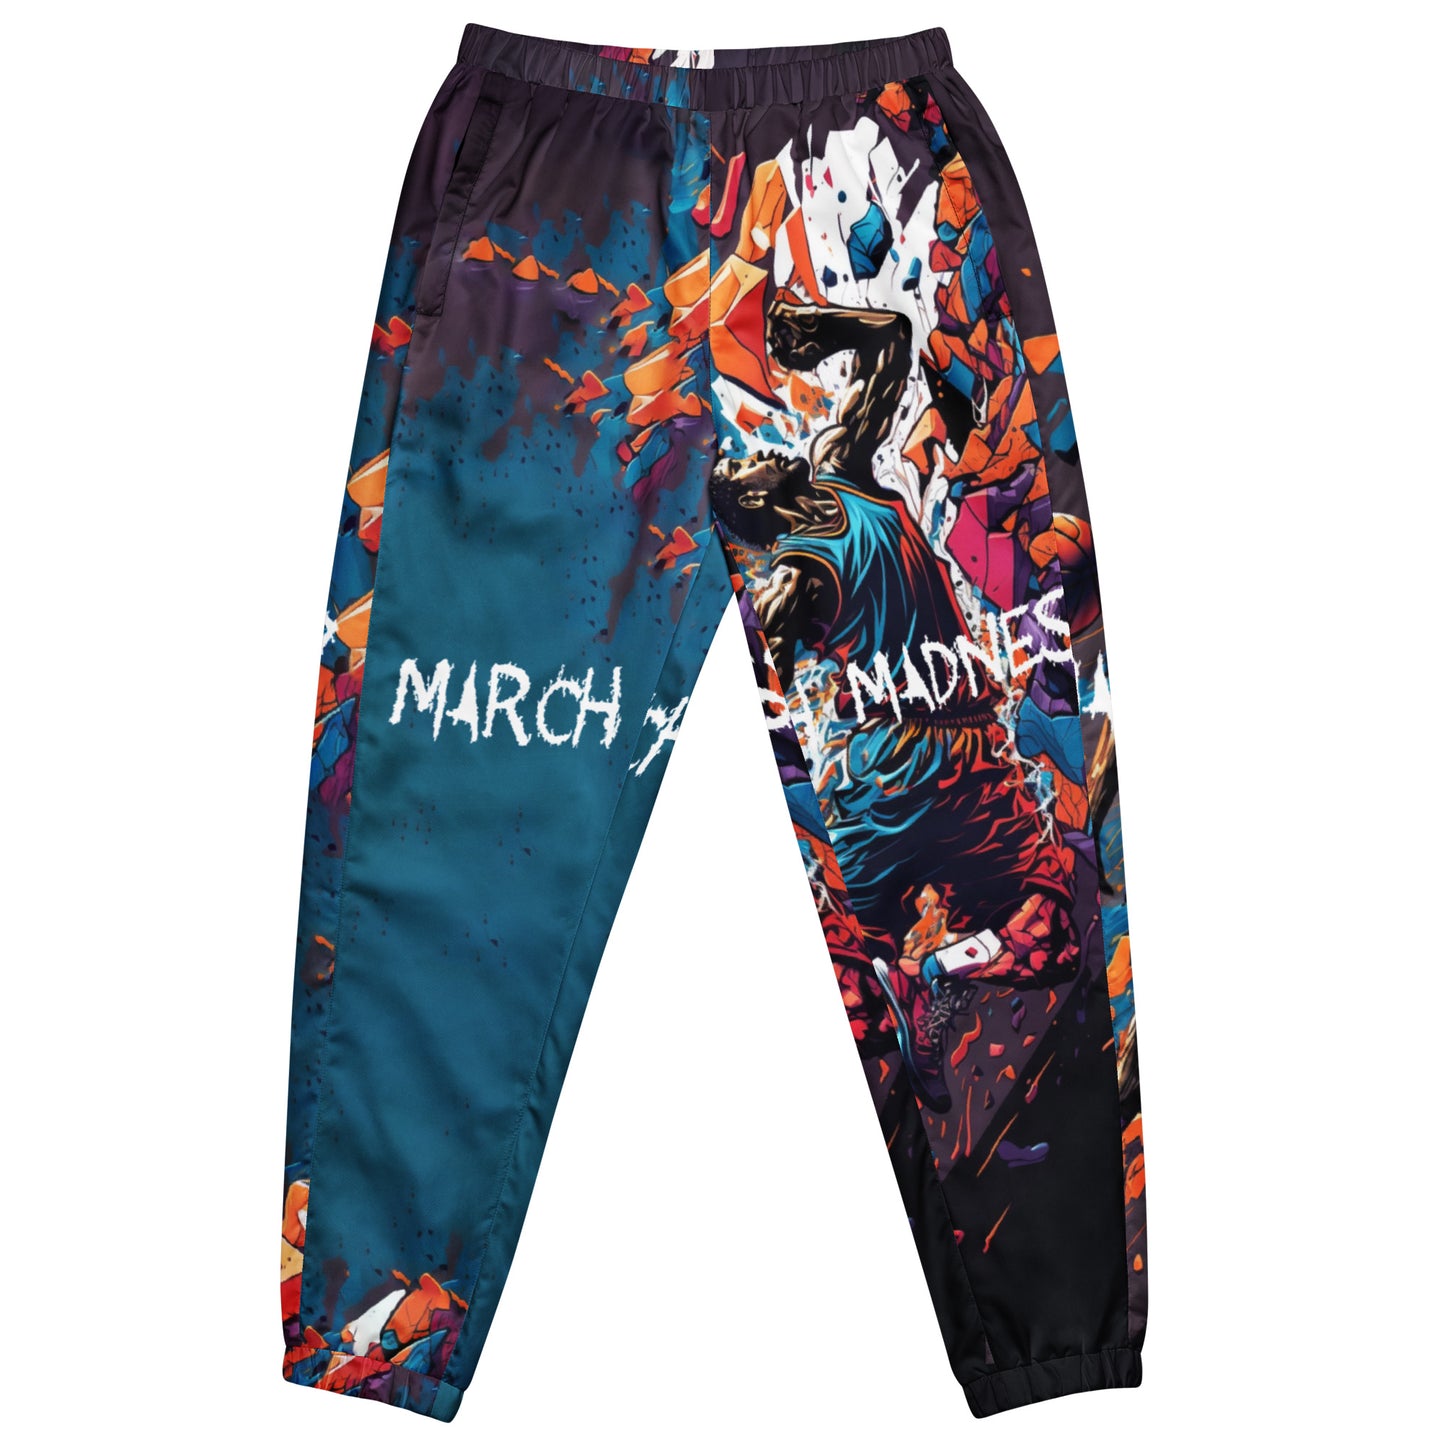 March Mad Ness - Unisex track pants